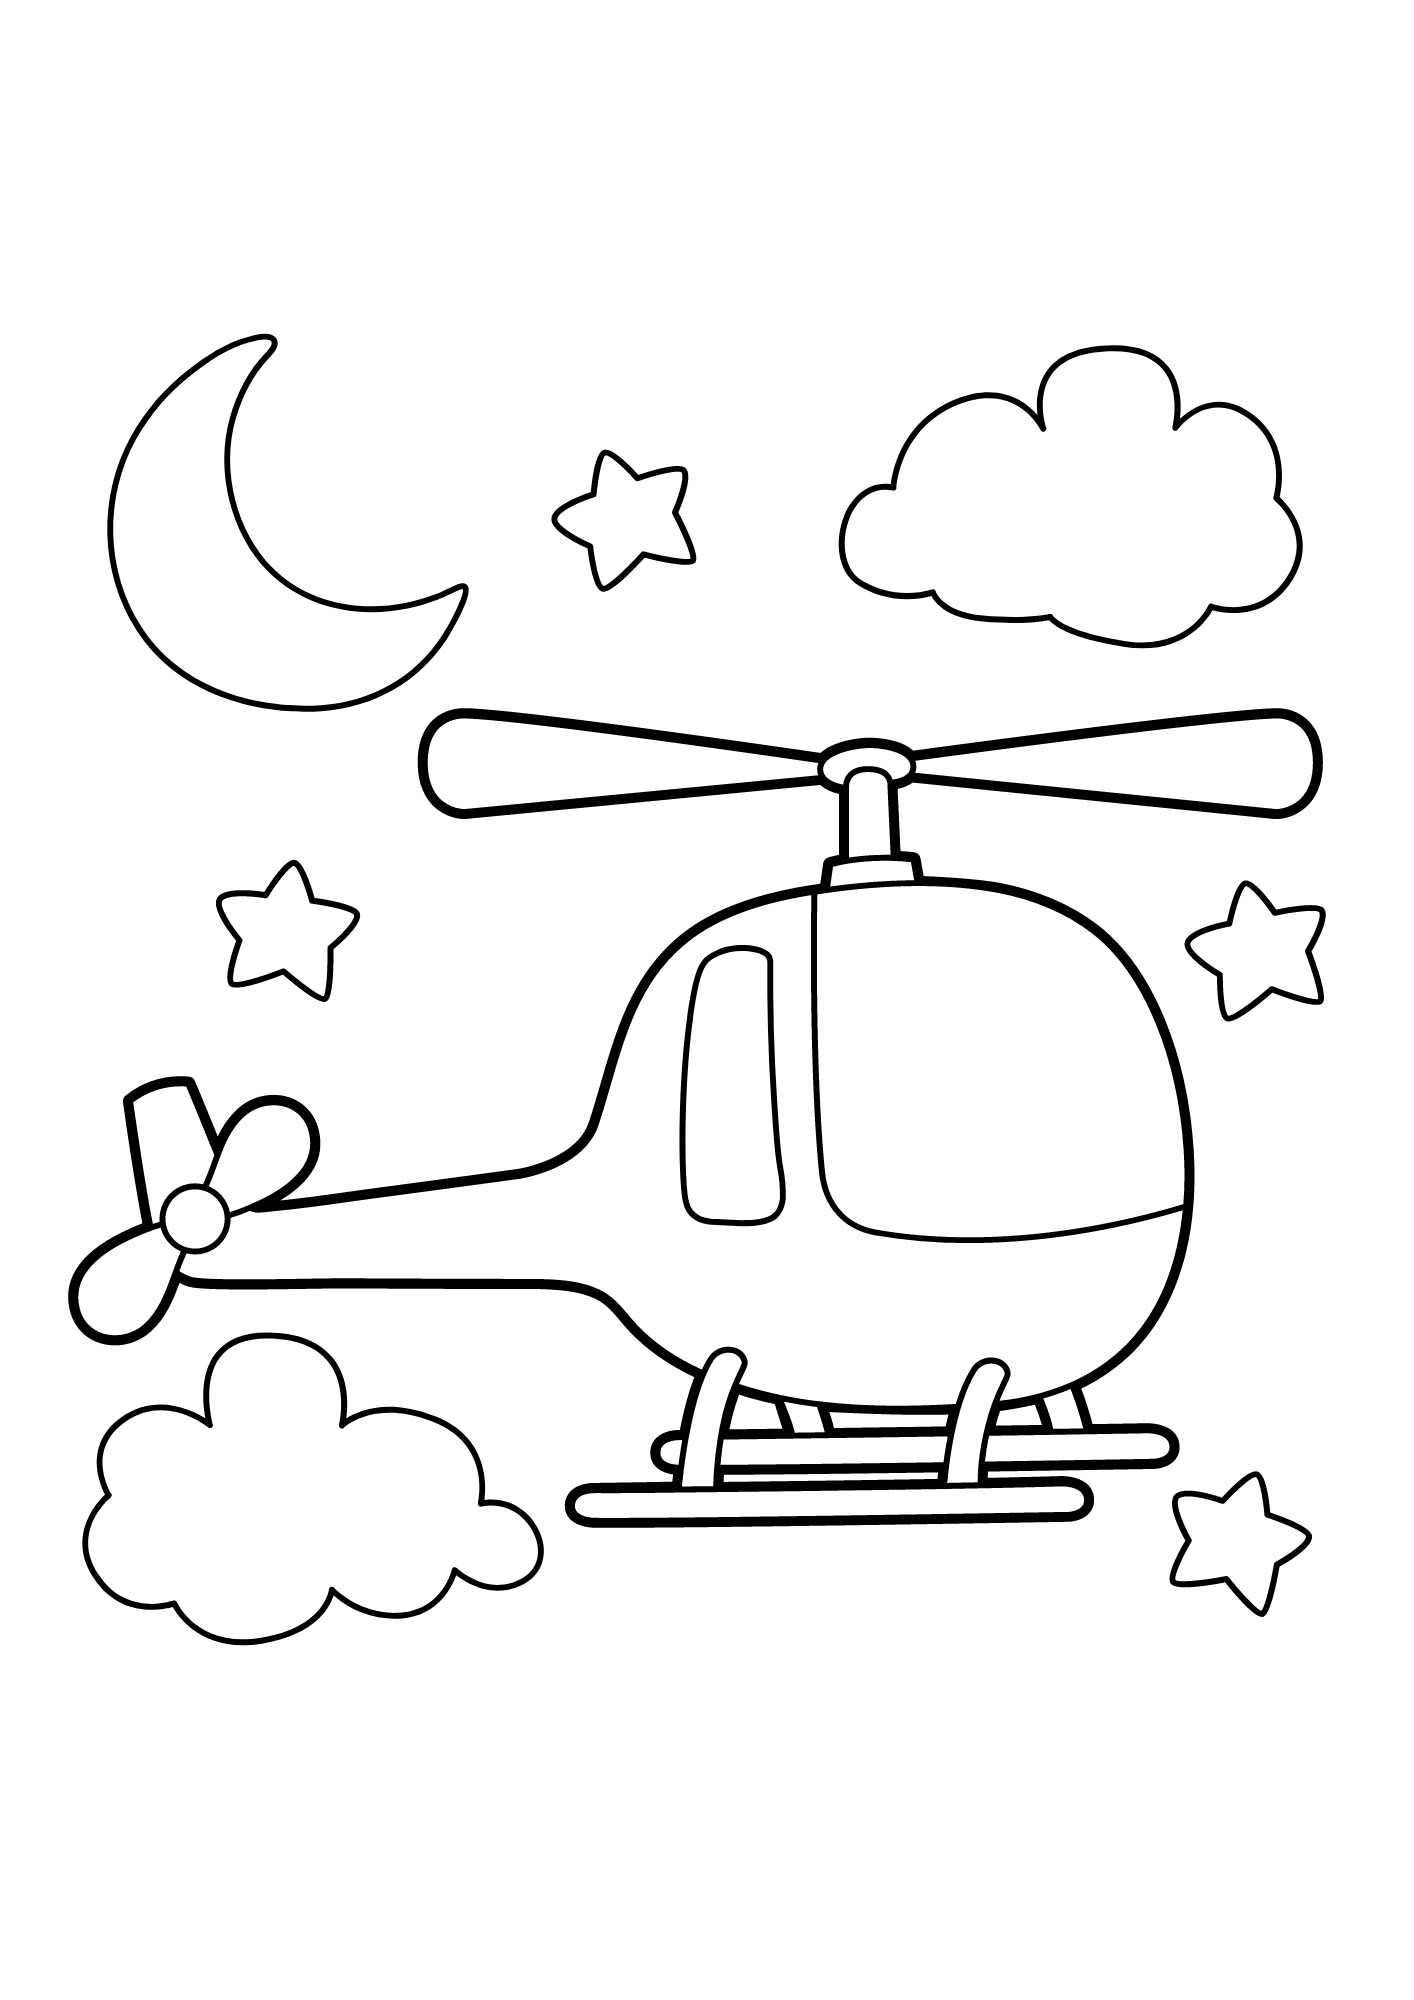 Helicopter Picture For Kids Coloring Pages